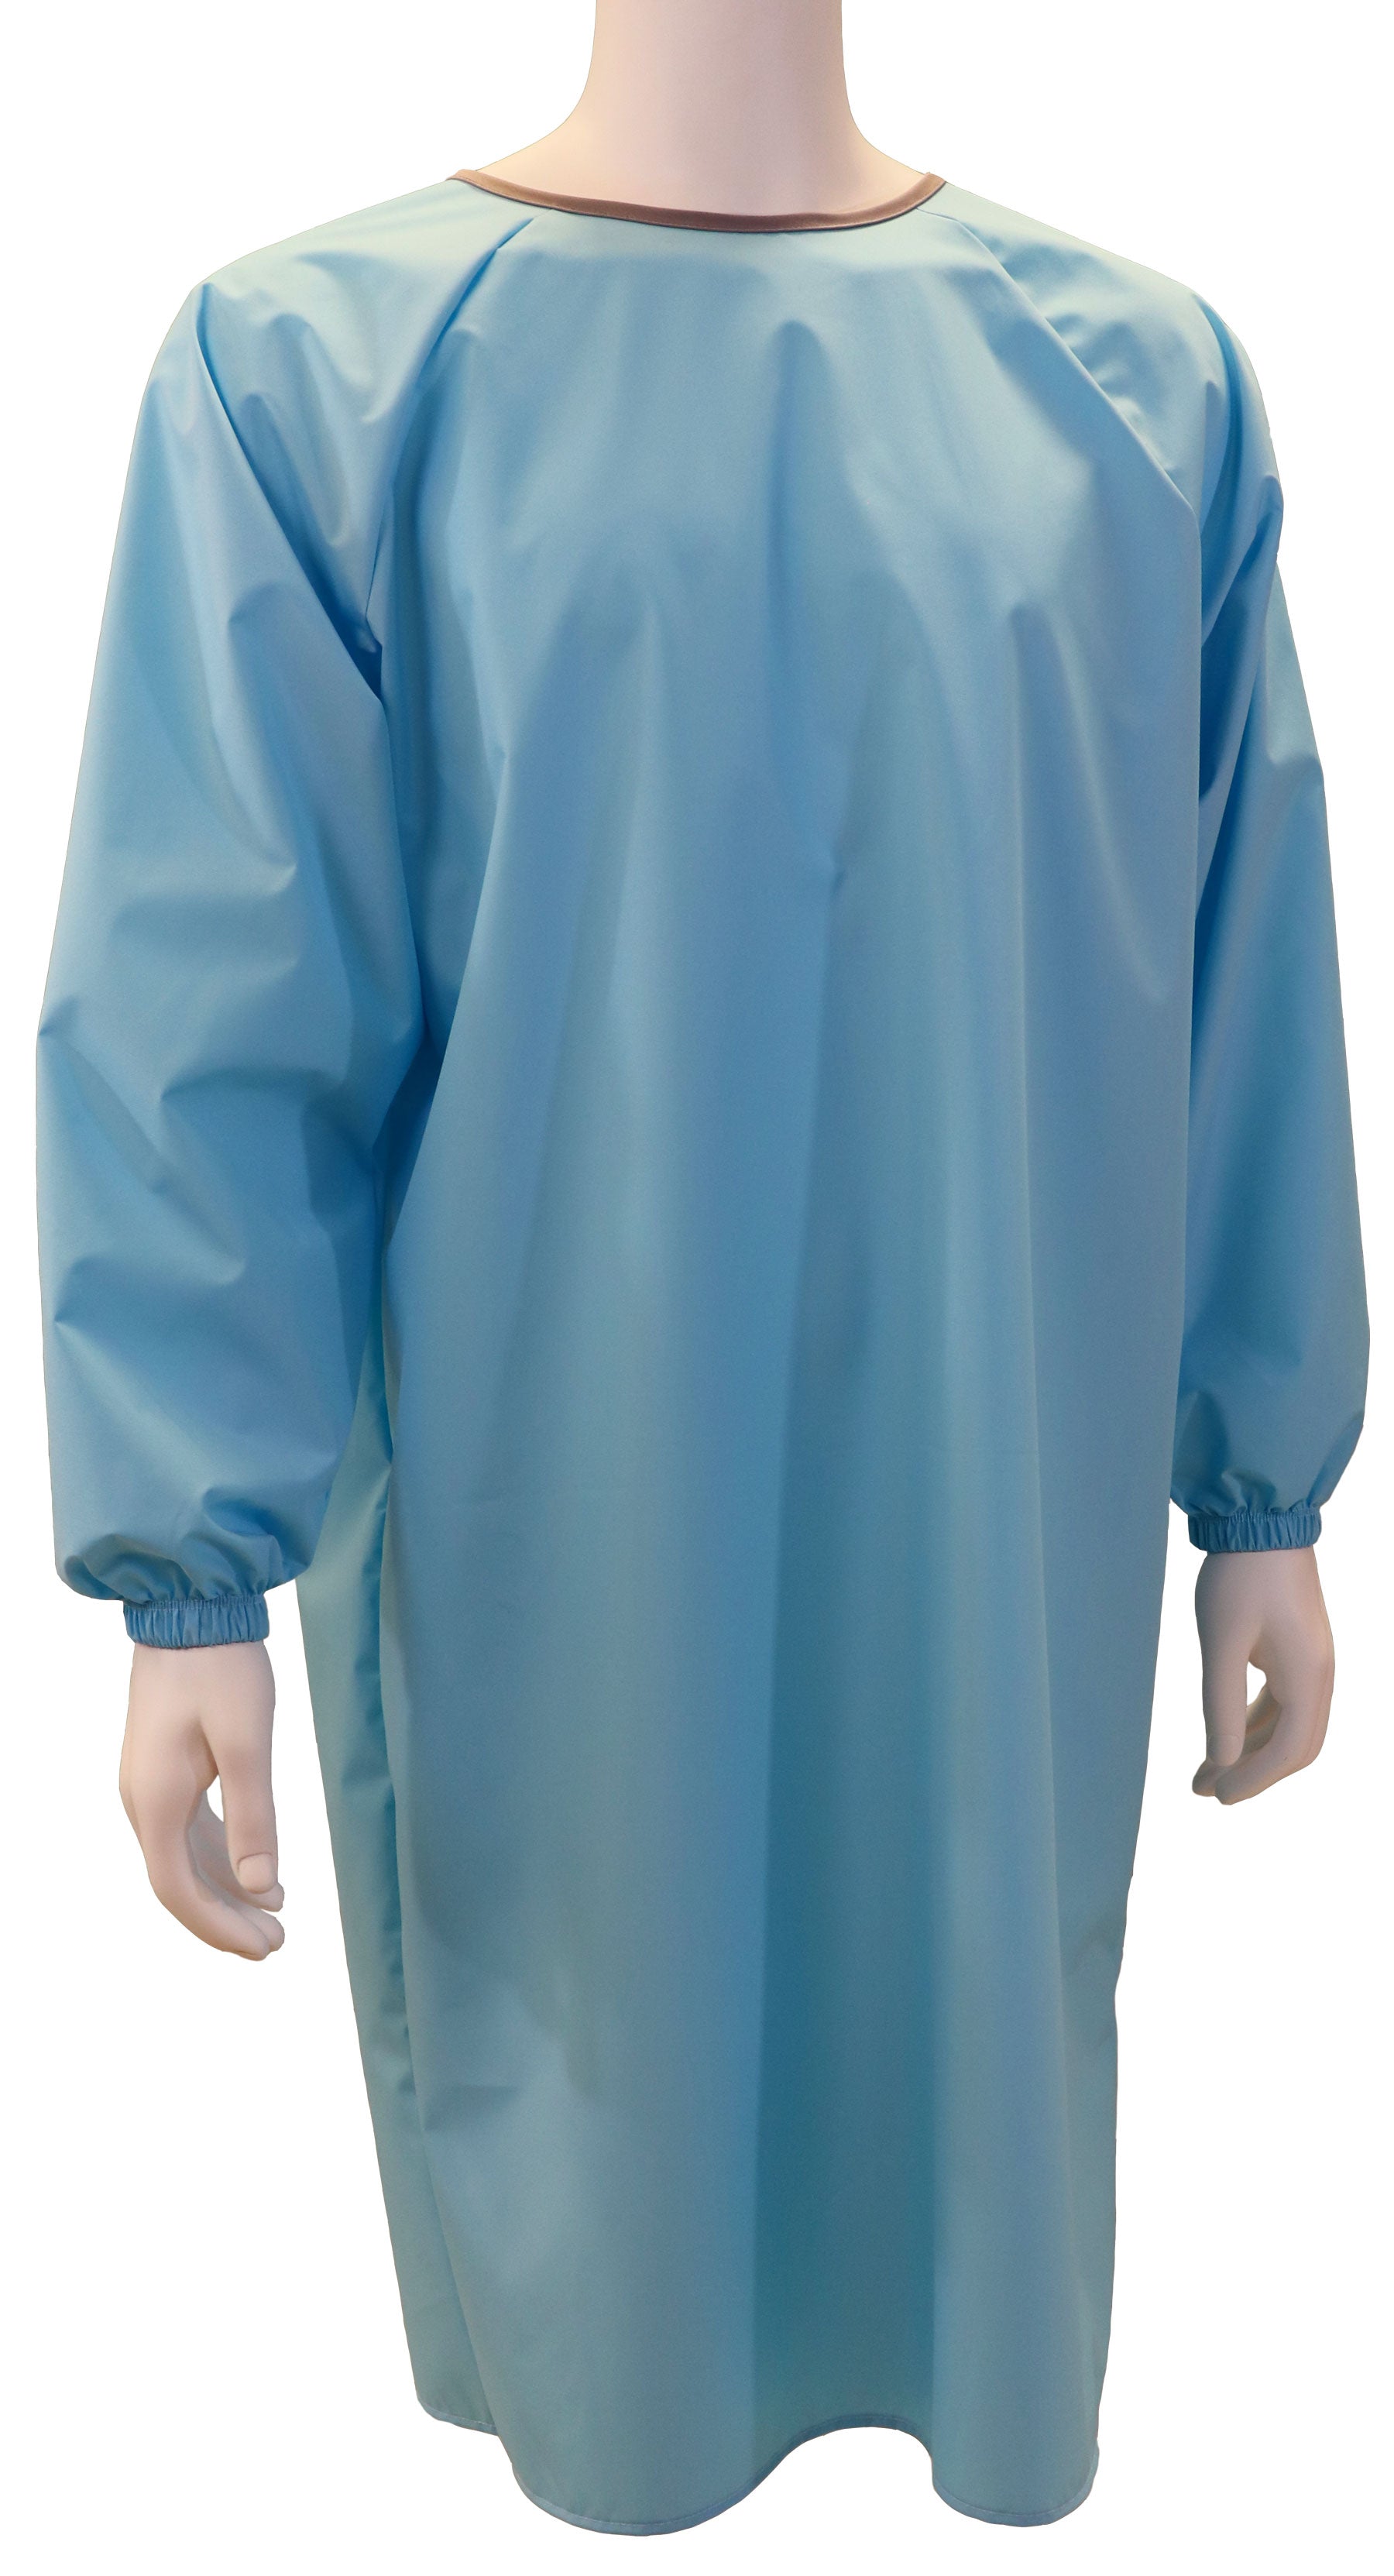 Surgical Gown - Dress Code Clothing Private Limited